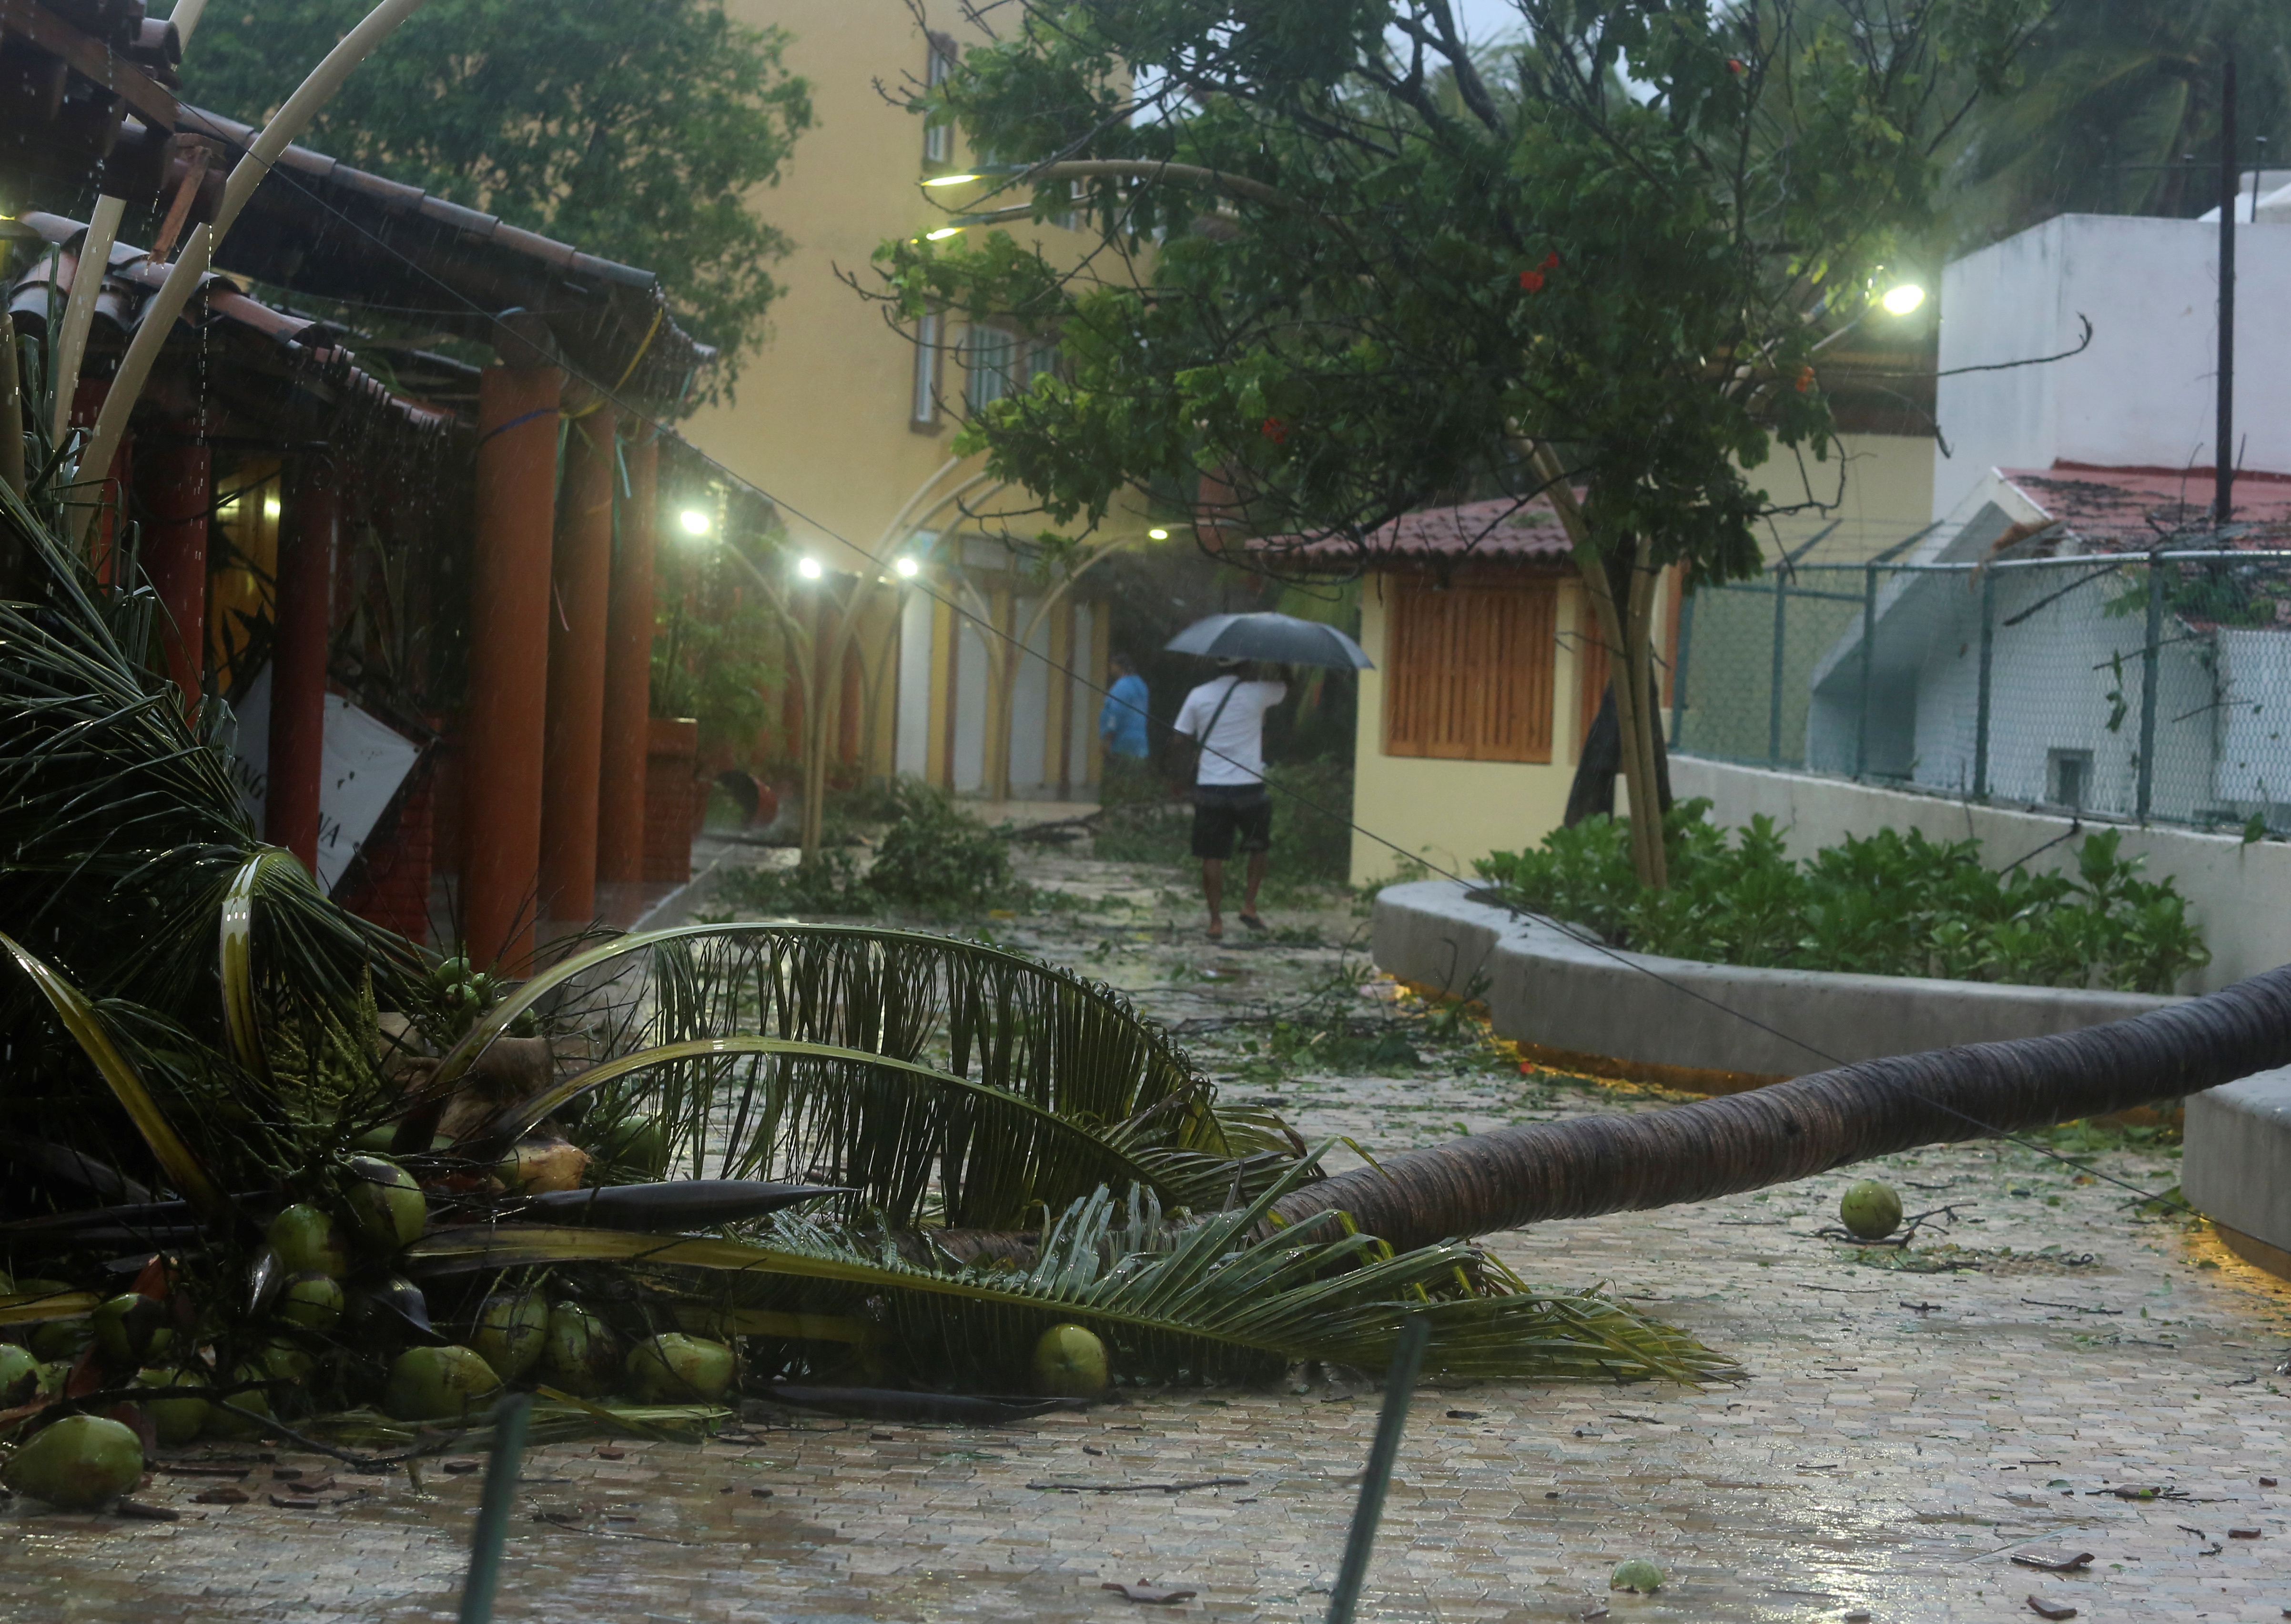 A man under an umbrella walks along the street with fallen trees after Hurricane Rick hit in Zihuatanejo, in Guerrero state, Mexico October 25, 2021. REUTERS/Javier Verdin